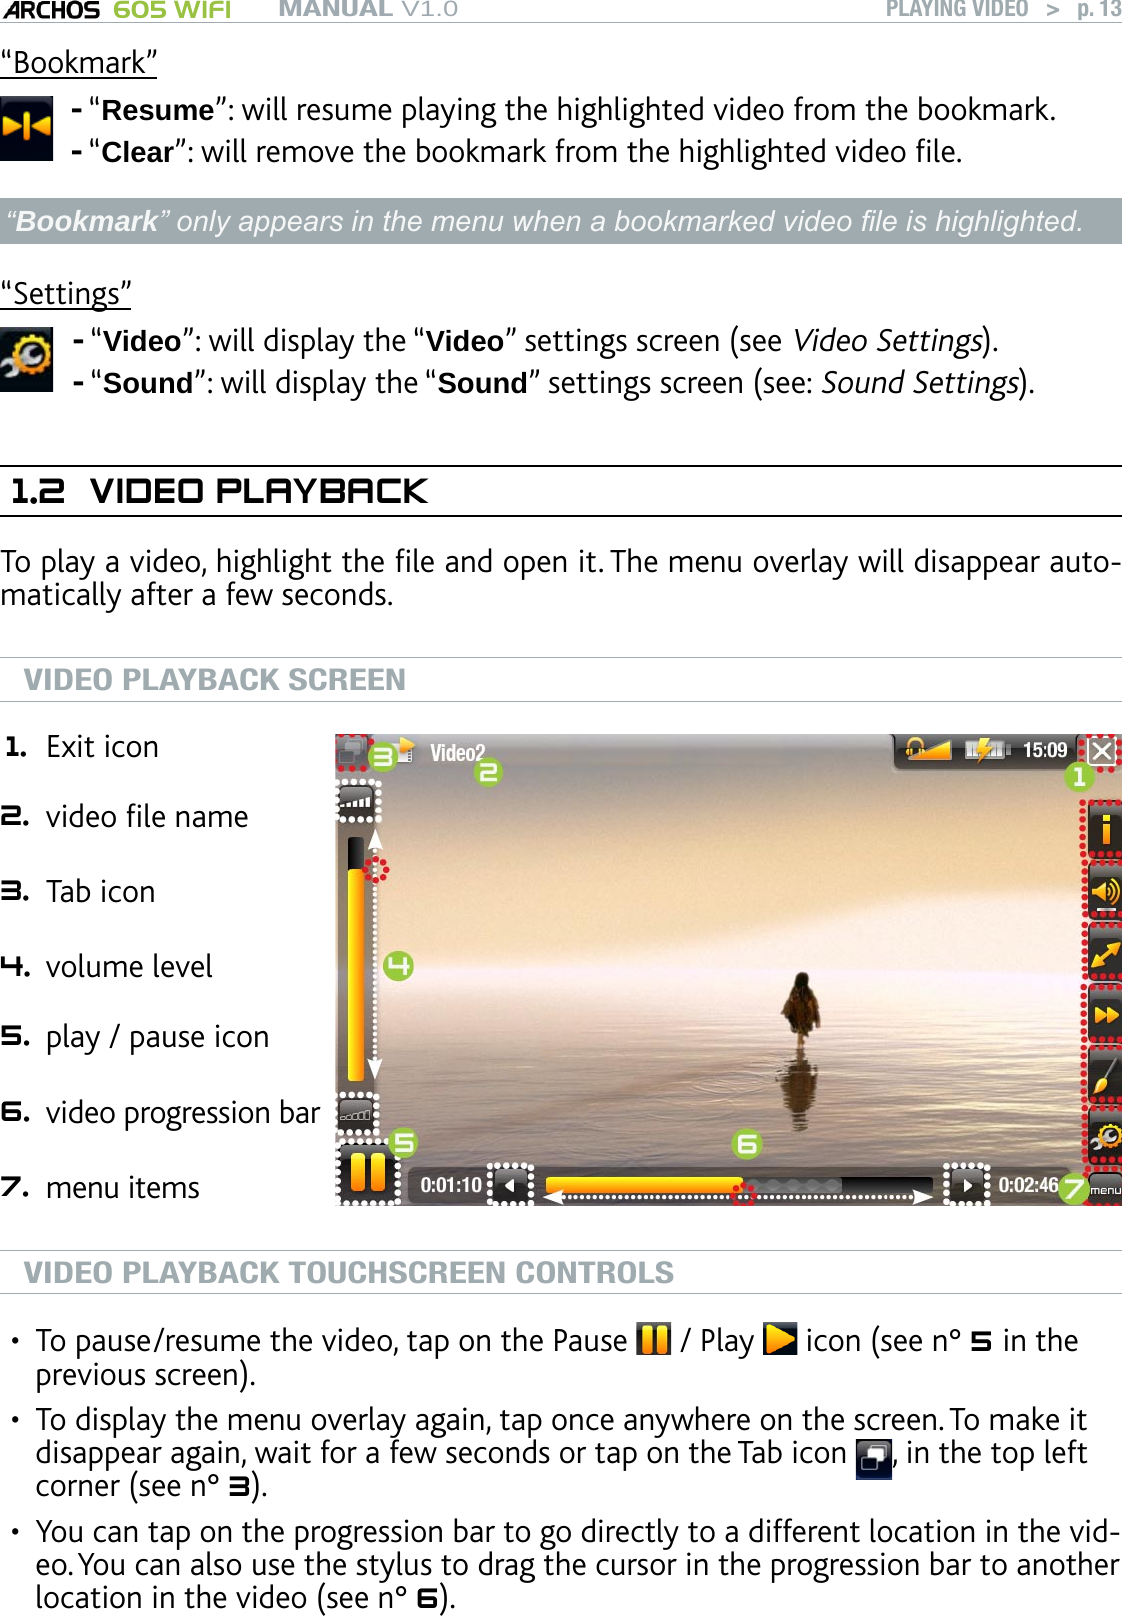 MANUAL V1.0 605 WIFI PLAYING VIDEO   &gt;   p. 13“Bookmark”“Resume”: will resume playing the highlighted video from the bookmark.“Clear”: will remove the bookmark from the highlighted video le.--“Bookmark” only appears in the menu when a bookmarked video le is highlighted.“Settings”“Video”: will display the “Video” settings screen (see Video Settings).“Sound”: will display the “Sound” settings screen (see: Sound Settings).--1.2  VIDEO PLAYBACKTo play a video, highlight the le and open it. The menu overlay will disappear auto-matically after a few seconds. VIDEO PLAYBACK SCREEN1. Exit icon 2. video le name  3. Tab icon 4. volume level 5. play / pause icon  6. video progression bar   7. menu itemsVIDEO PLAYBACK TOUCHSCREEN CONTROLSTo pause/resume the video, tap on the Pause   / Play   icon (see n° 5 in the previous screen).To display the menu overlay again, tap once anywhere on the screen. To make it disappear again, wait for a few seconds or tap on the Tab icon  , in the top left corner (see n° 3).You can tap on the progression bar to go directly to a different location in the vid-eo. You can also use the stylus to drag the cursor in the progression bar to another location in the video (see n° 6). •••